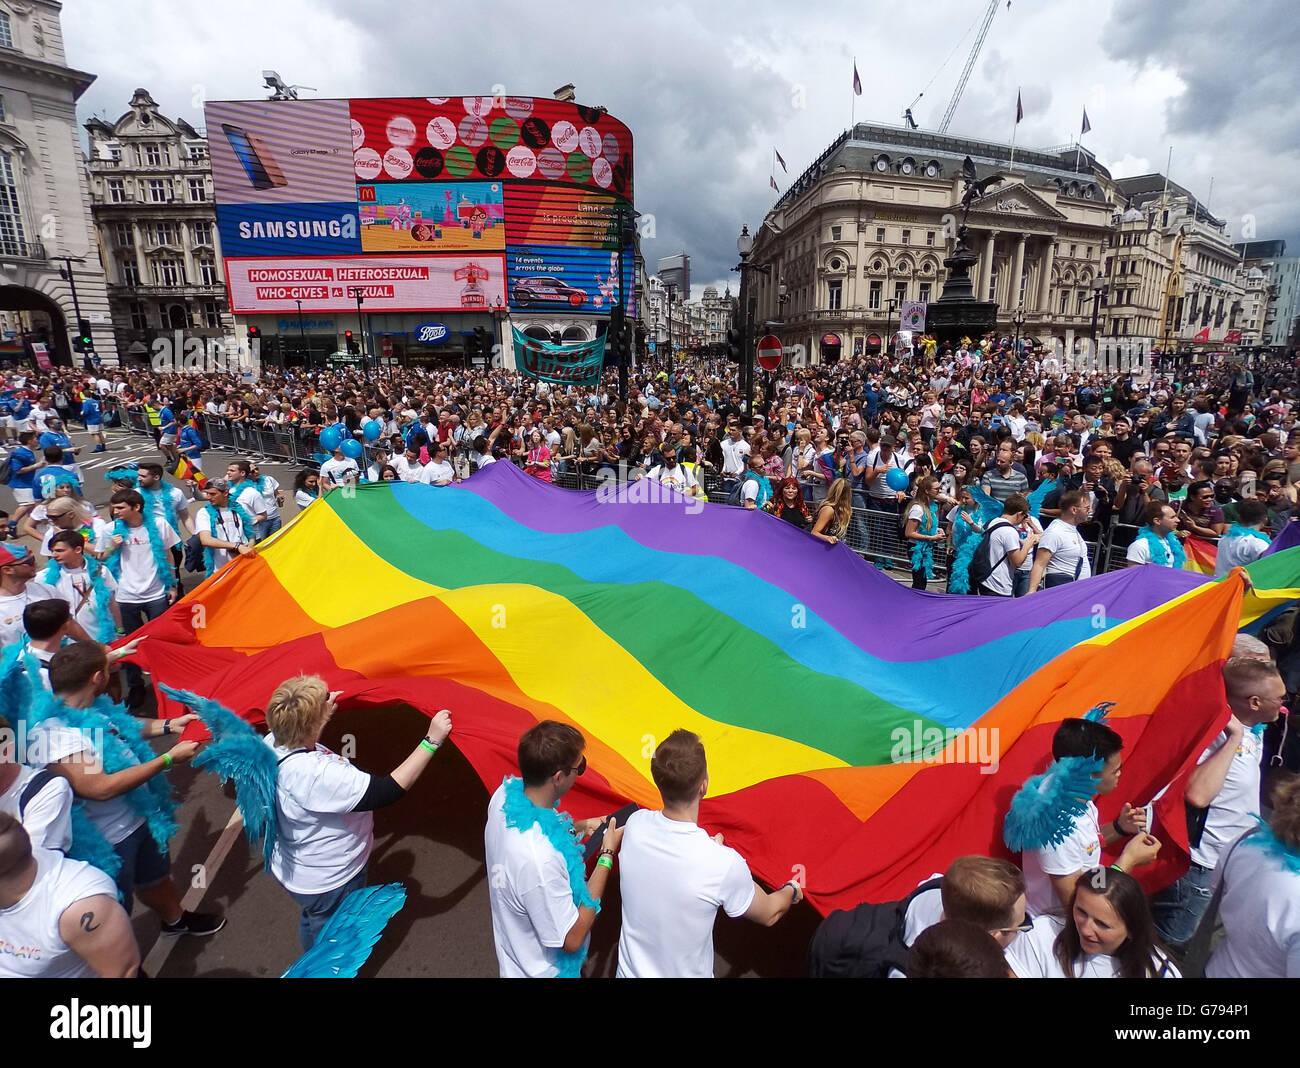 London, UK. 25th June 2016. Giant Rainbow Flag at the Pride London Parade in London where the theme is #nofilter Credit:  Paul Brown/Alamy Live News Stock Photo